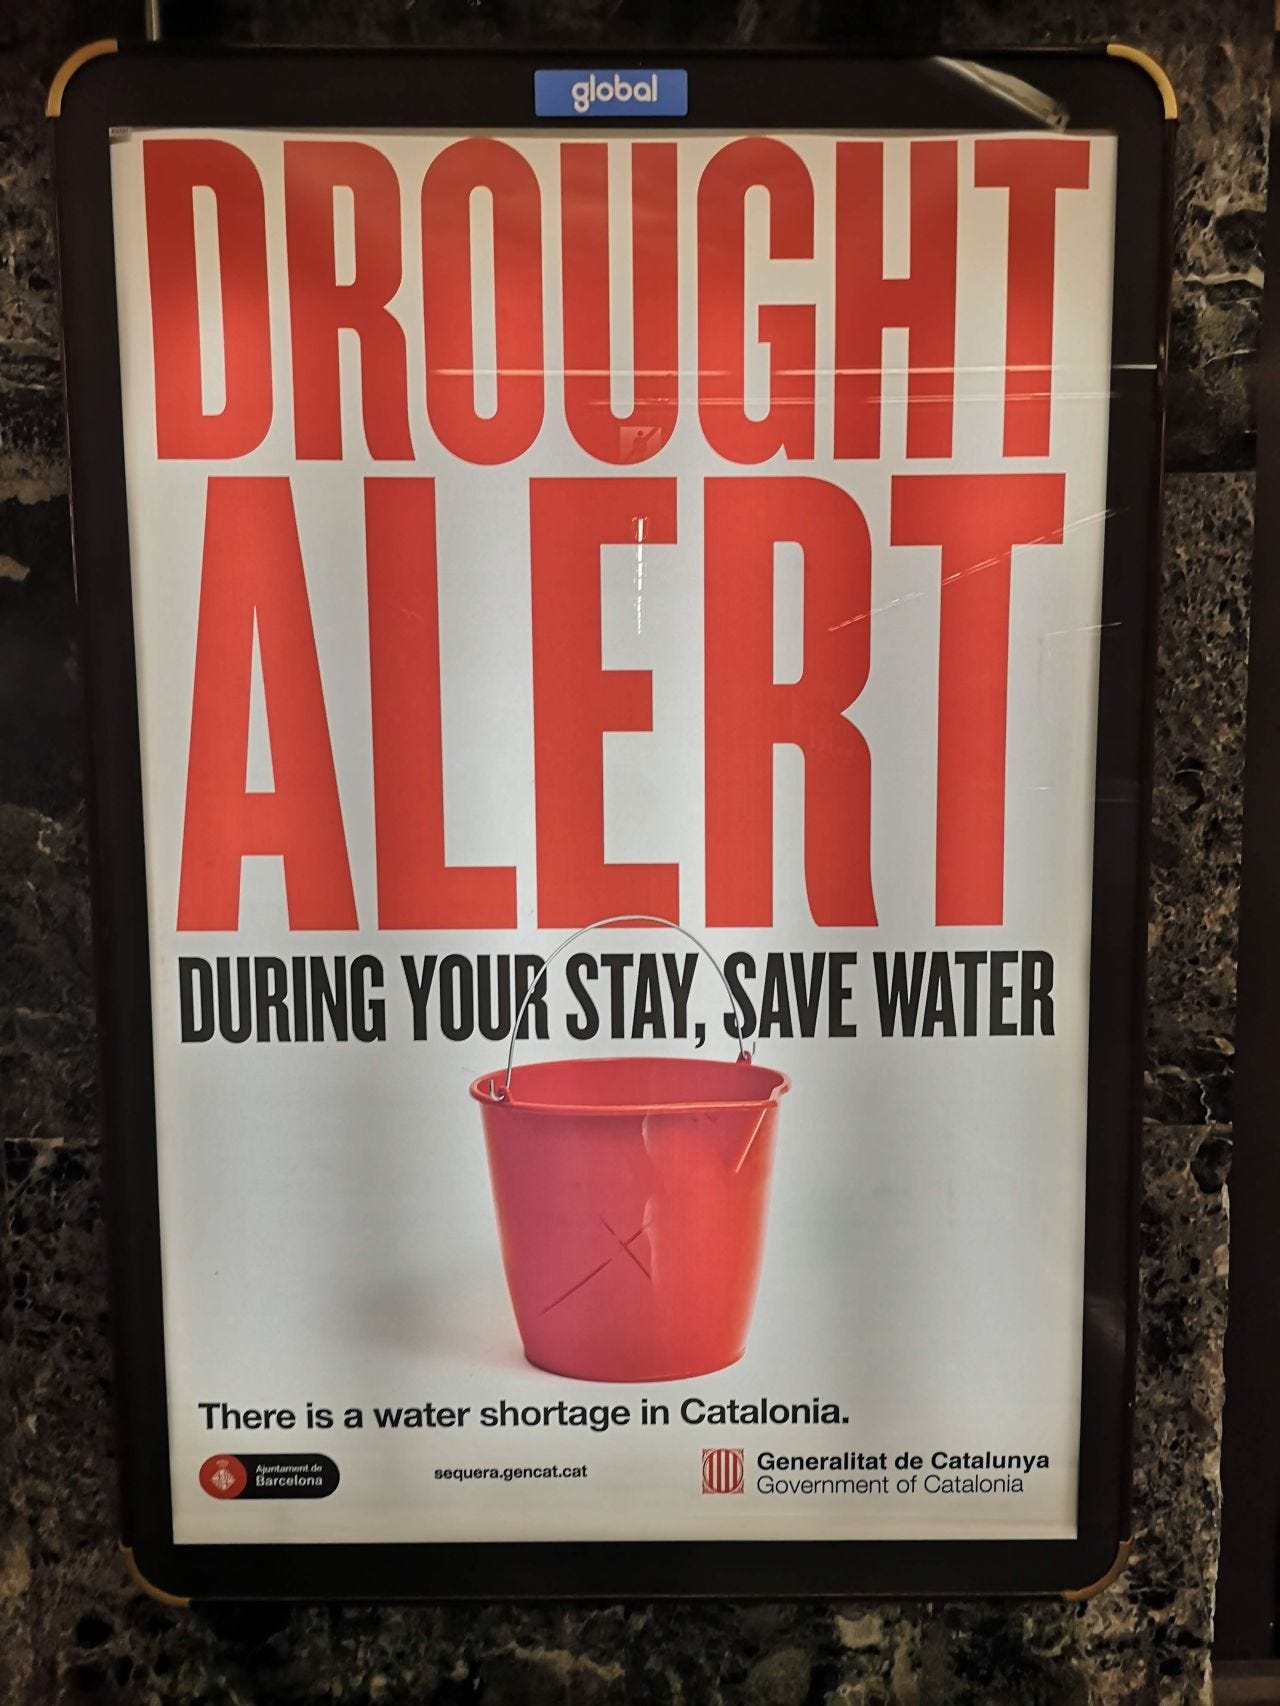 Poster with "drought alert" written on it, showing an empty bucket and asking people to save water while staying in Catalunya. 